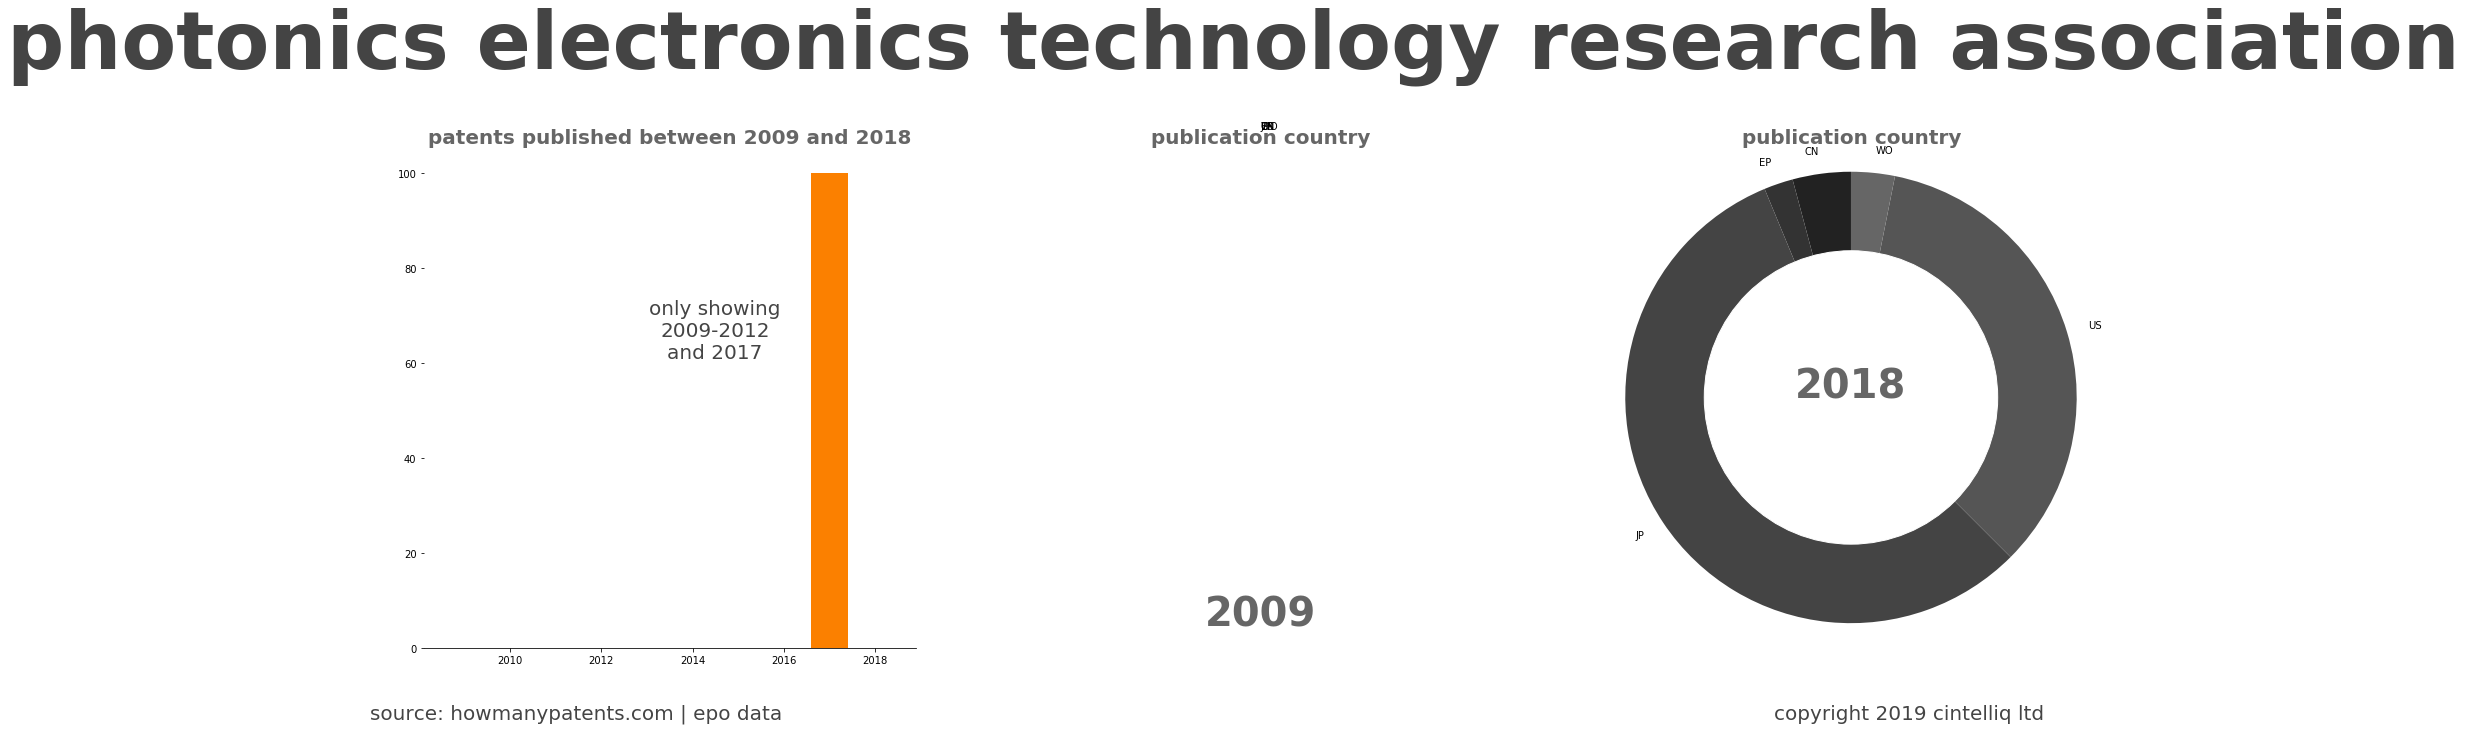 summary of patents for Photonics Electronics Technology Research Association